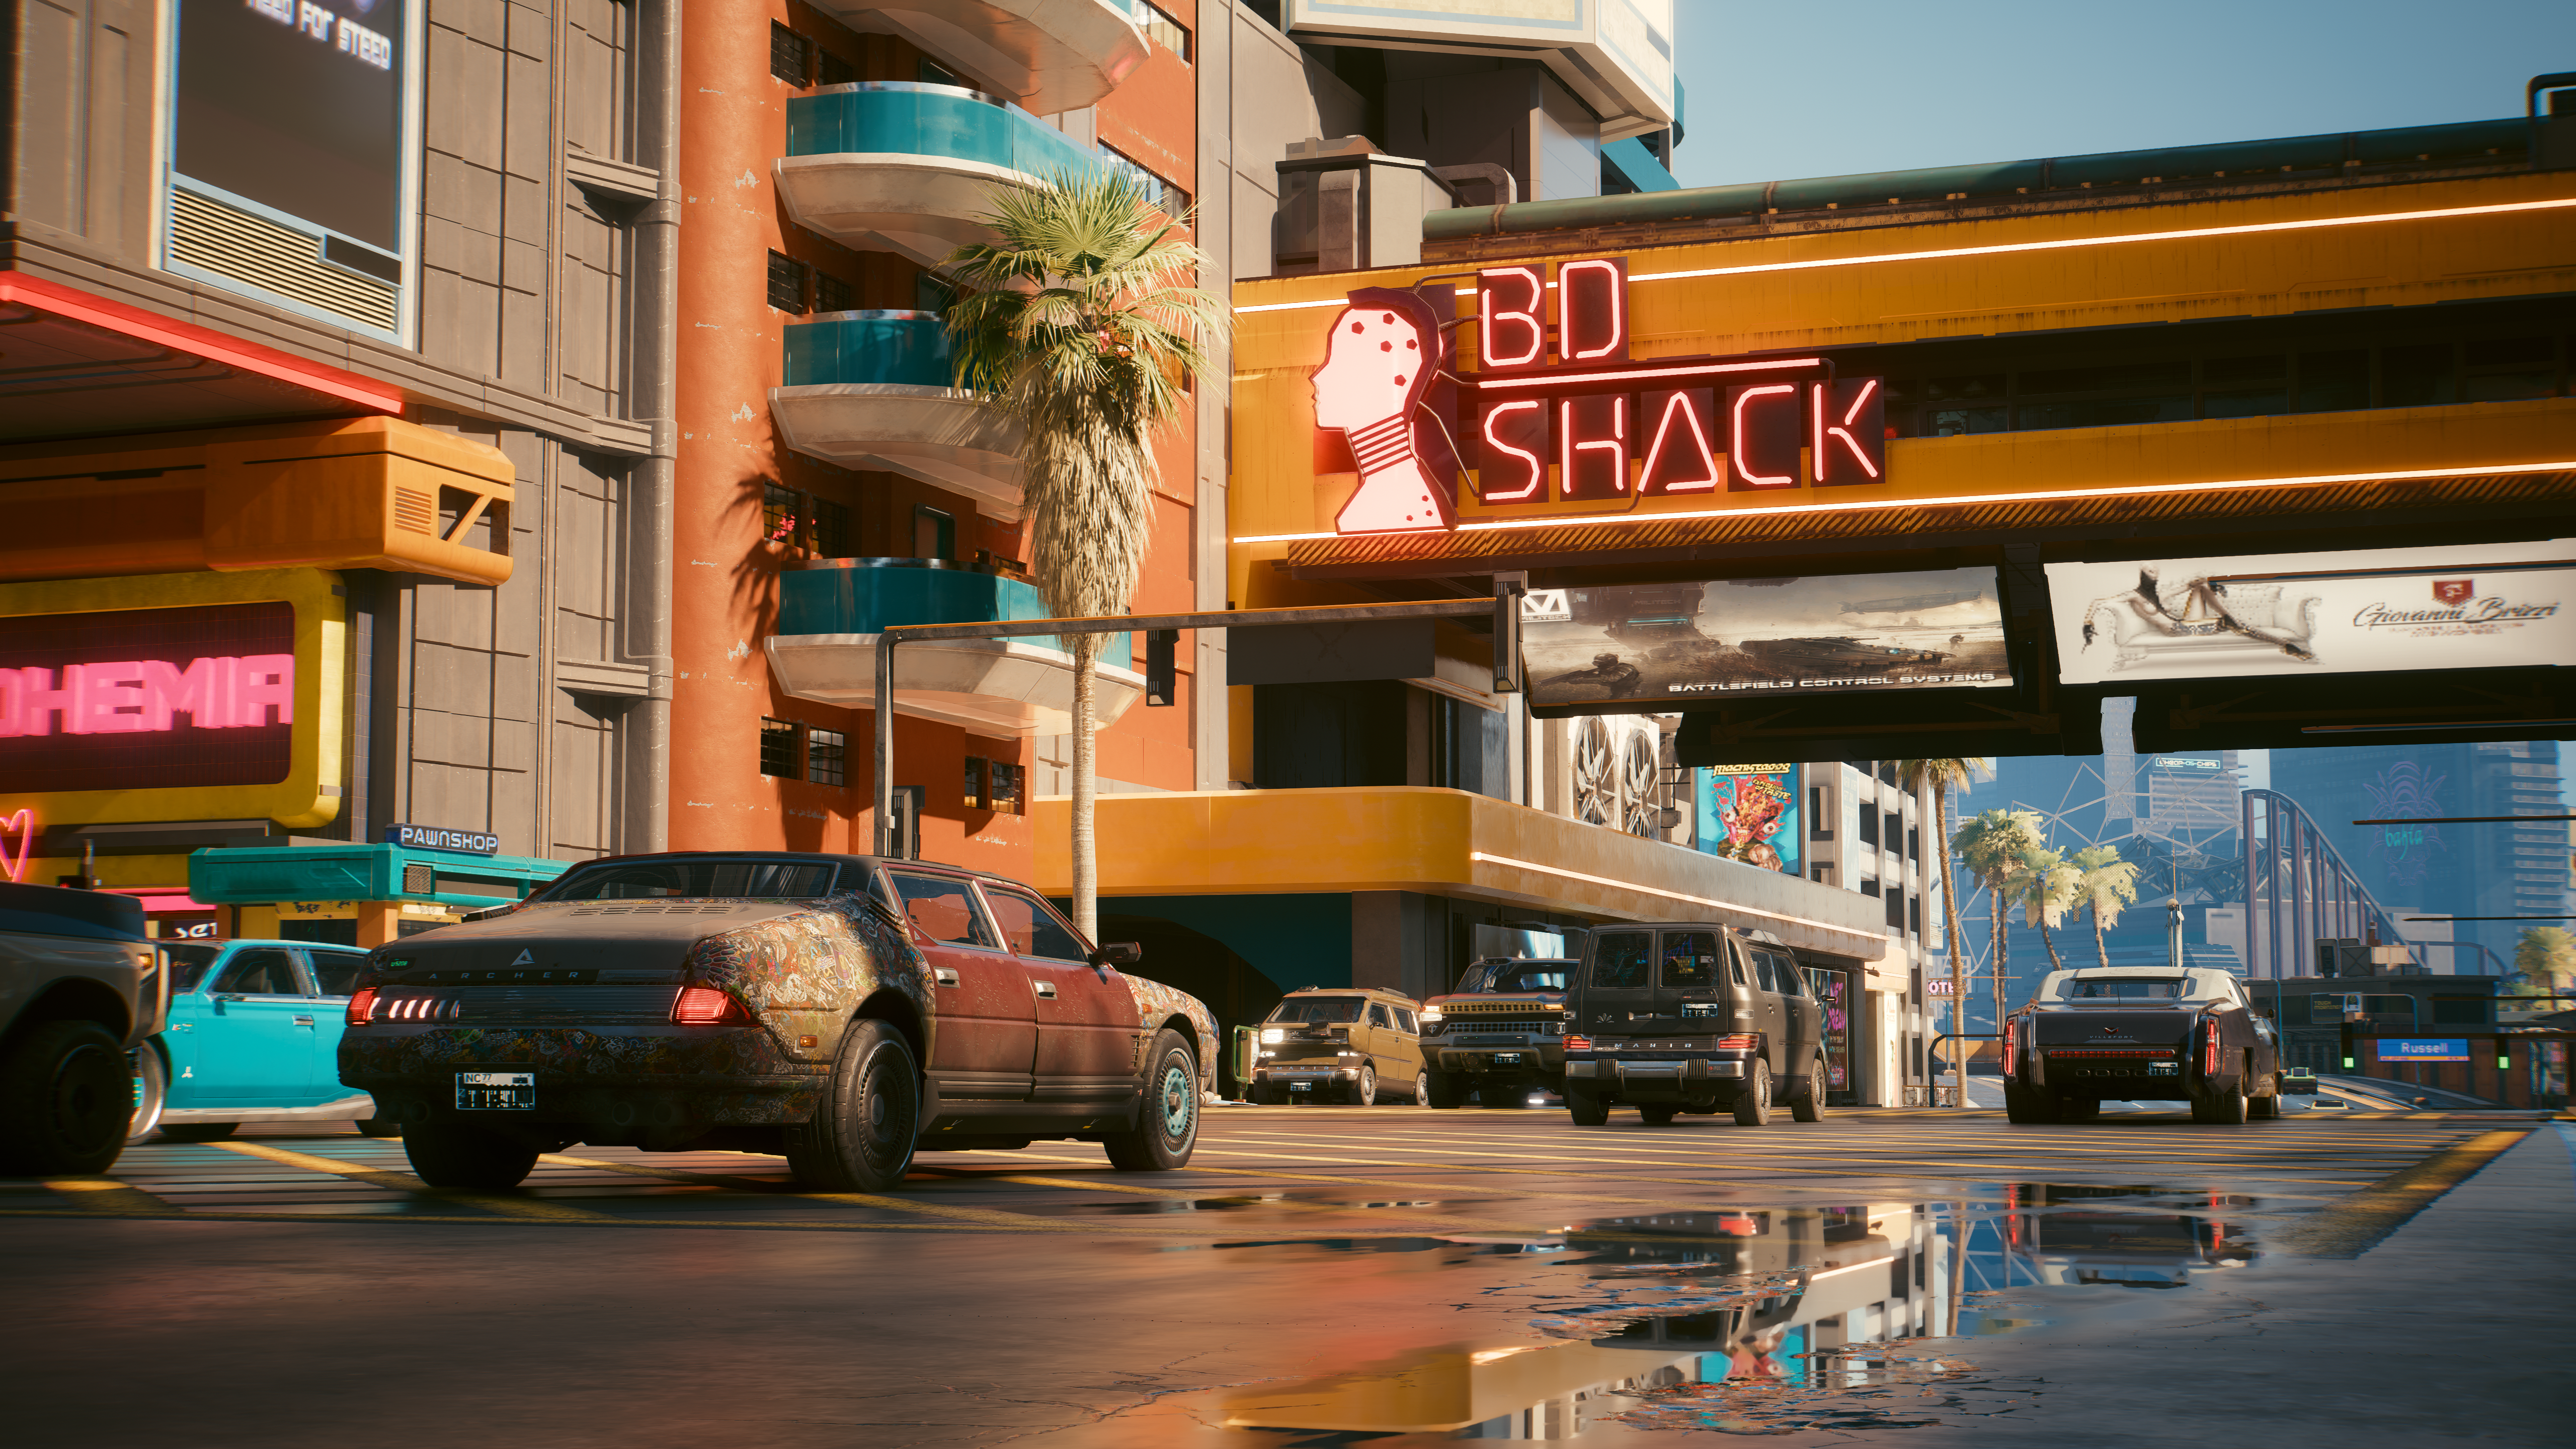 General 5120x2880 Cyberpunk 2077 video games Nvidia RTX path tracing car reflection neon sign CGI road building